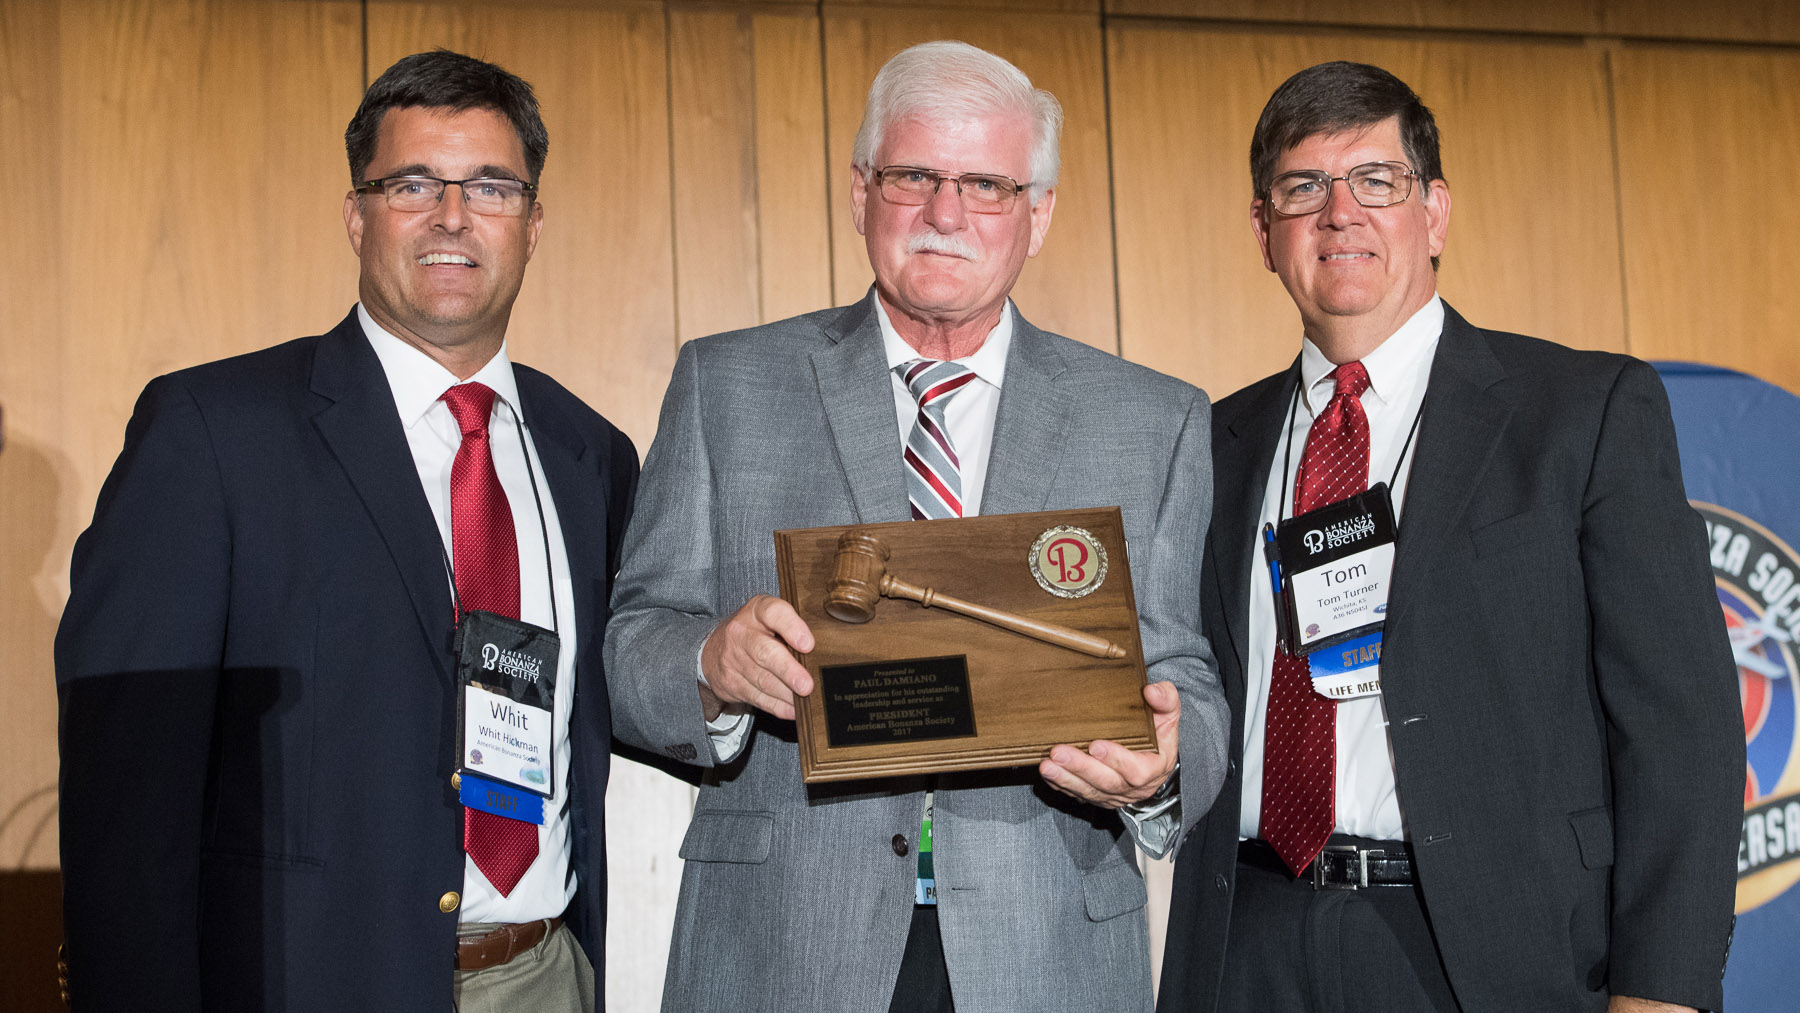 American Bonanza Society Executive Director Whit Hickman (left) and ABS Air Safety Foundation Executive Director Tom Turner (right) recognize the work of outgoing President Paul Damiano during the type club's fiftieth anniversary convention in Wichita. Photo courtesy of Visual Media Group.